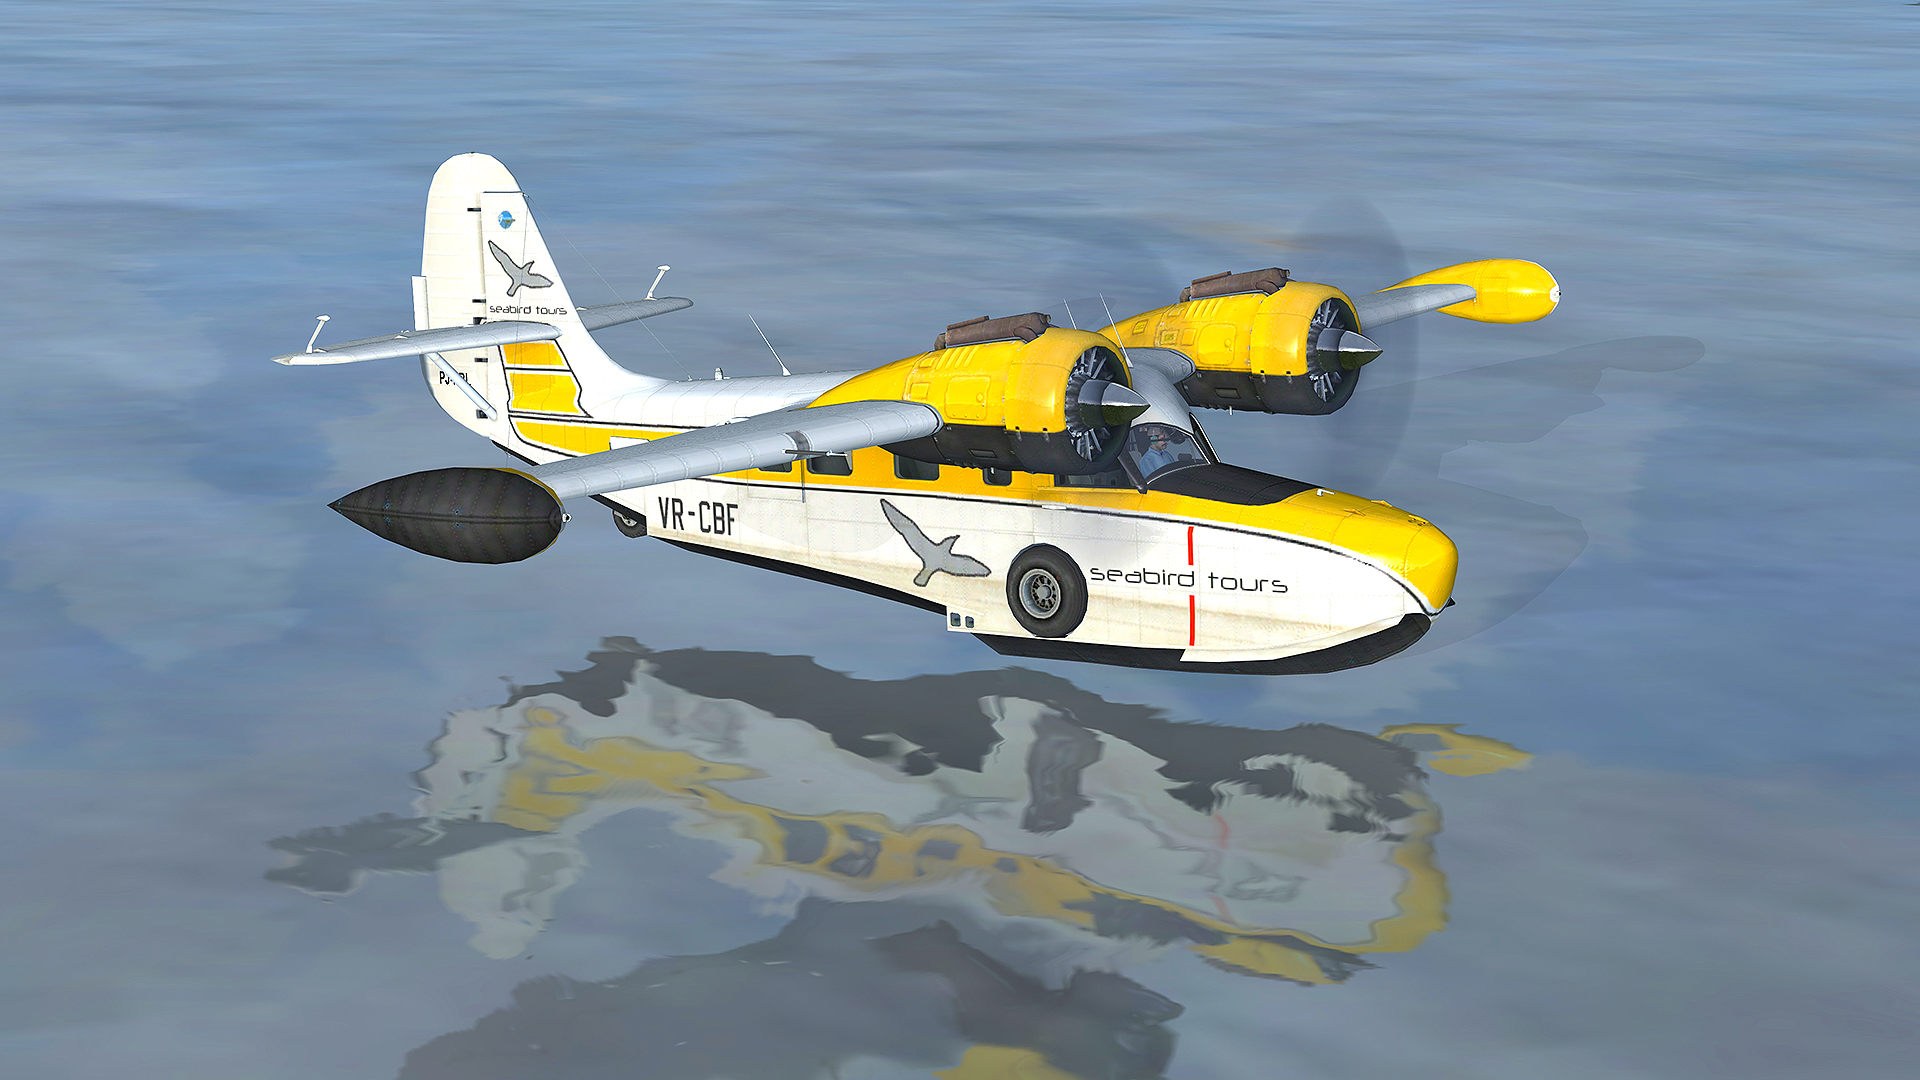 system requirements for microsoft flight simulator x gold edition